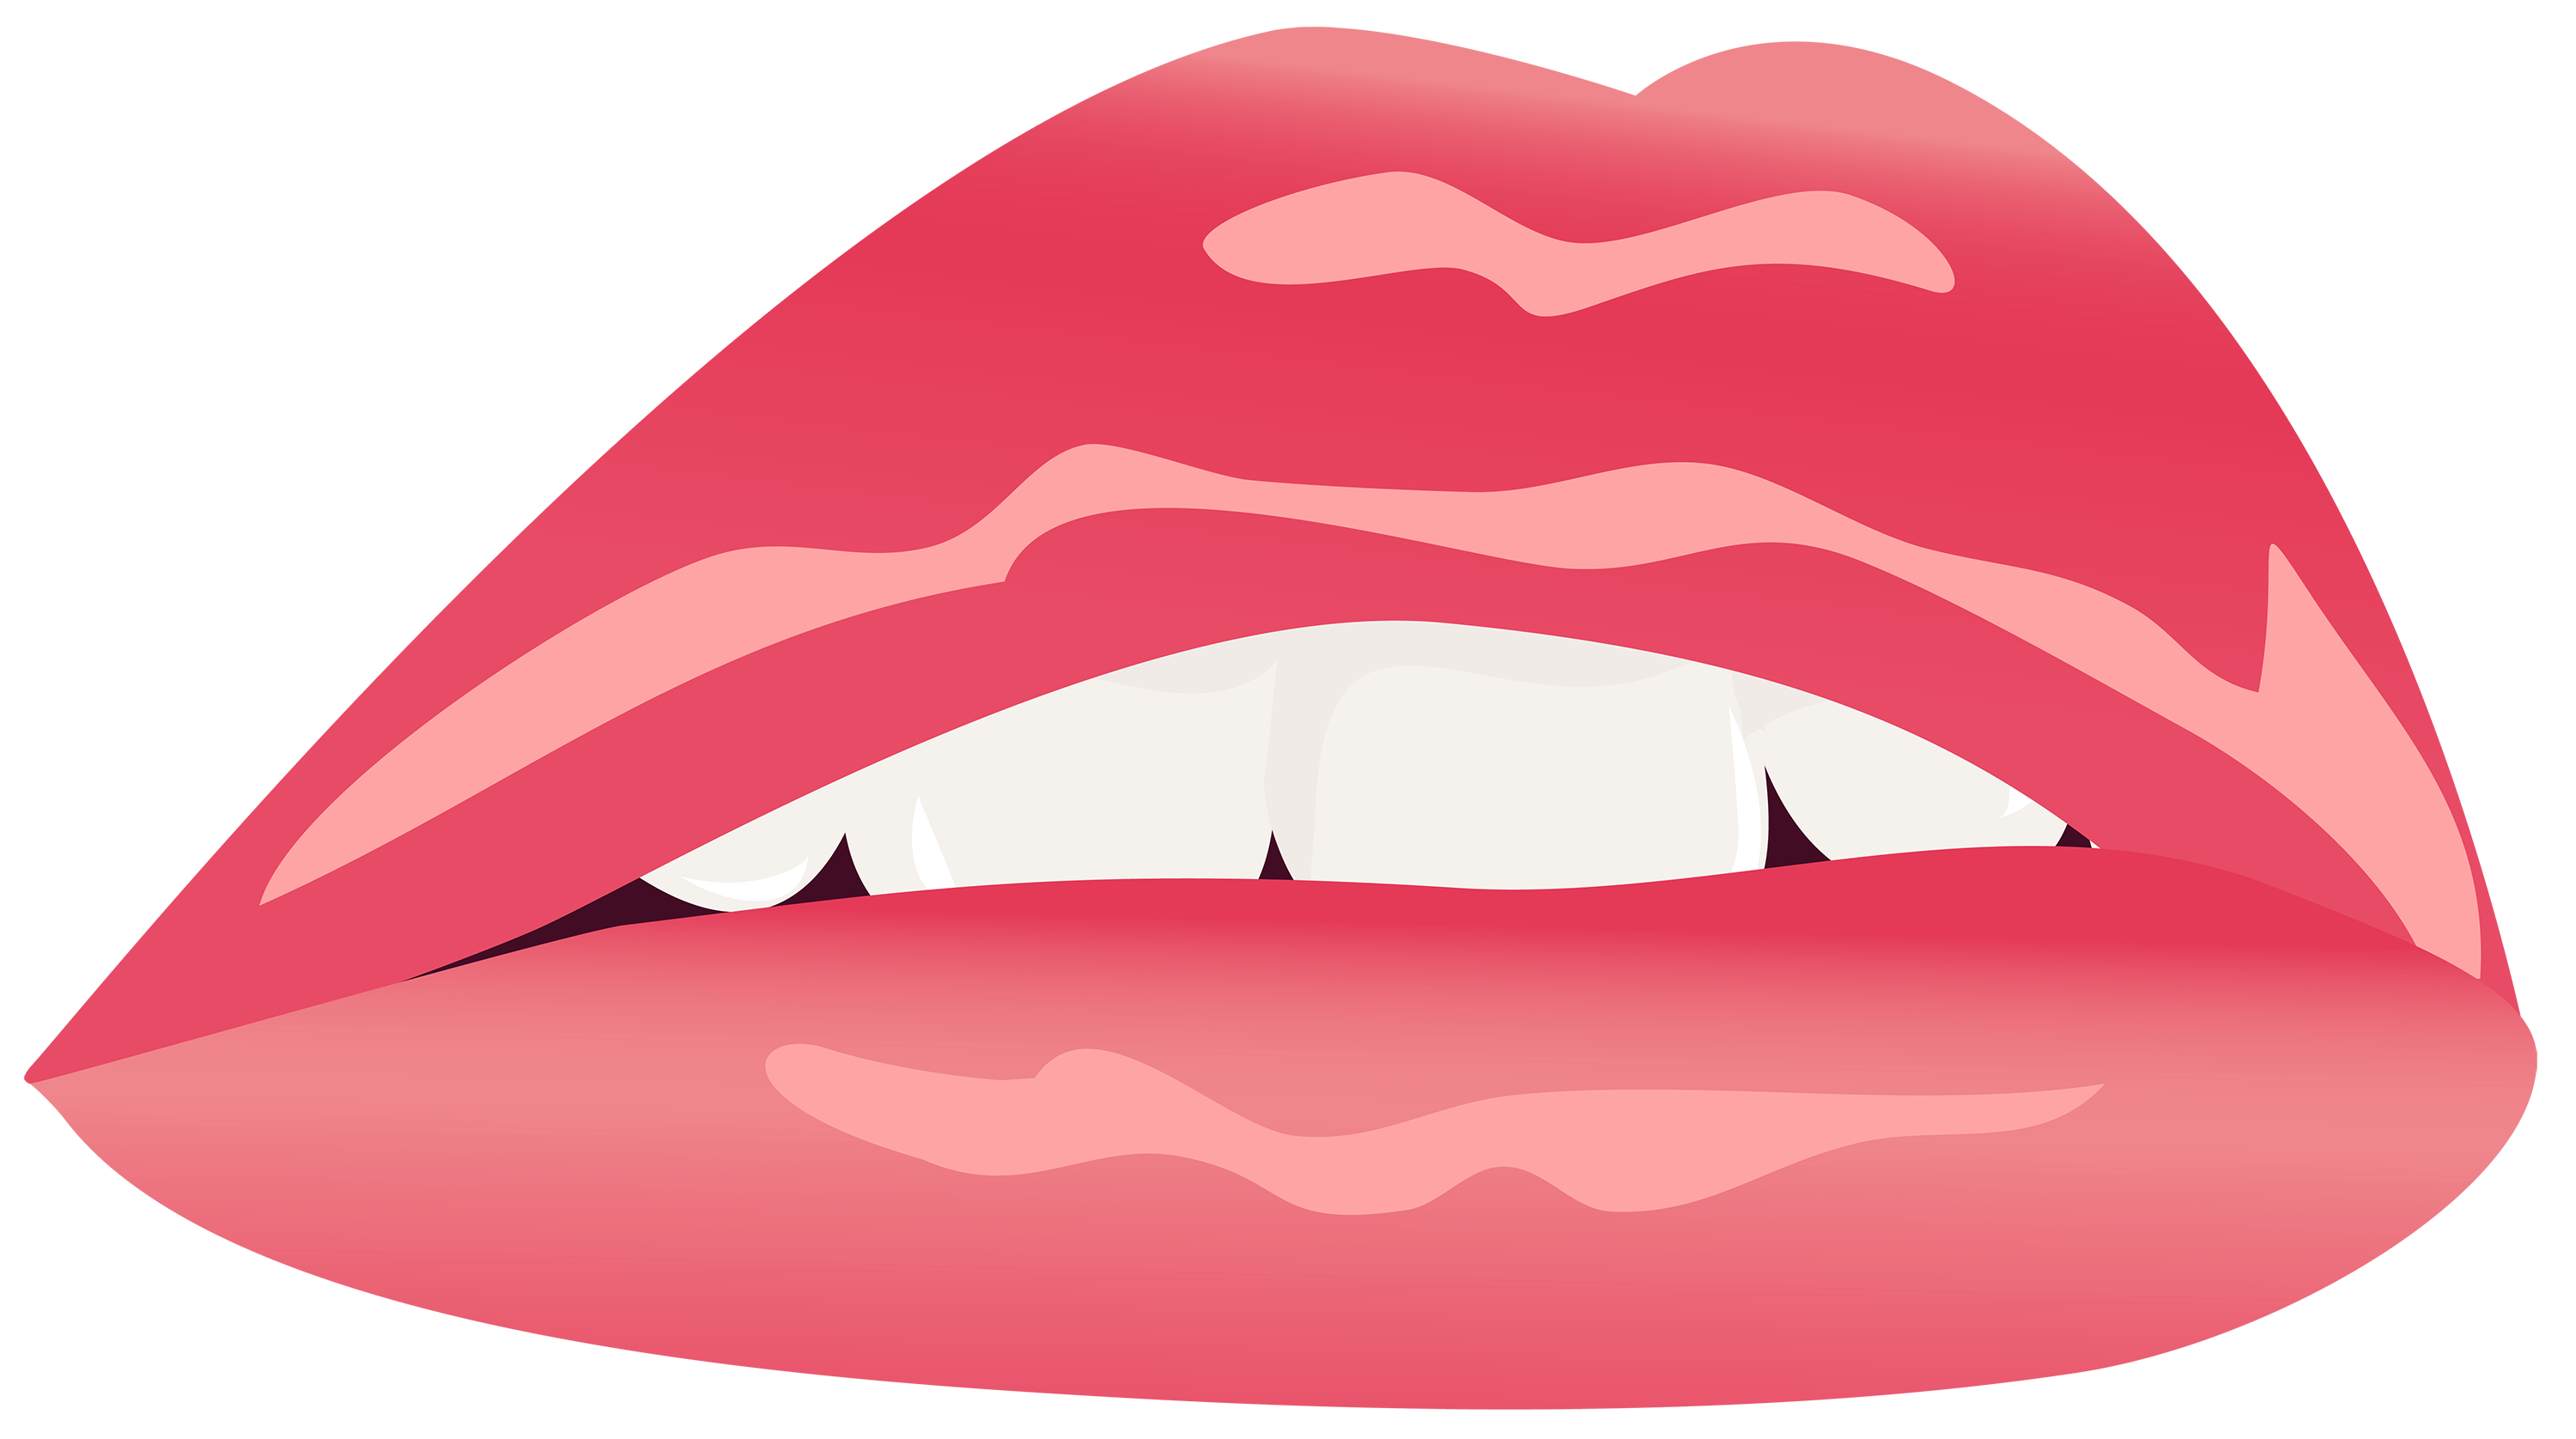 Red lips clipart image web clipart - Cliparting.com. 